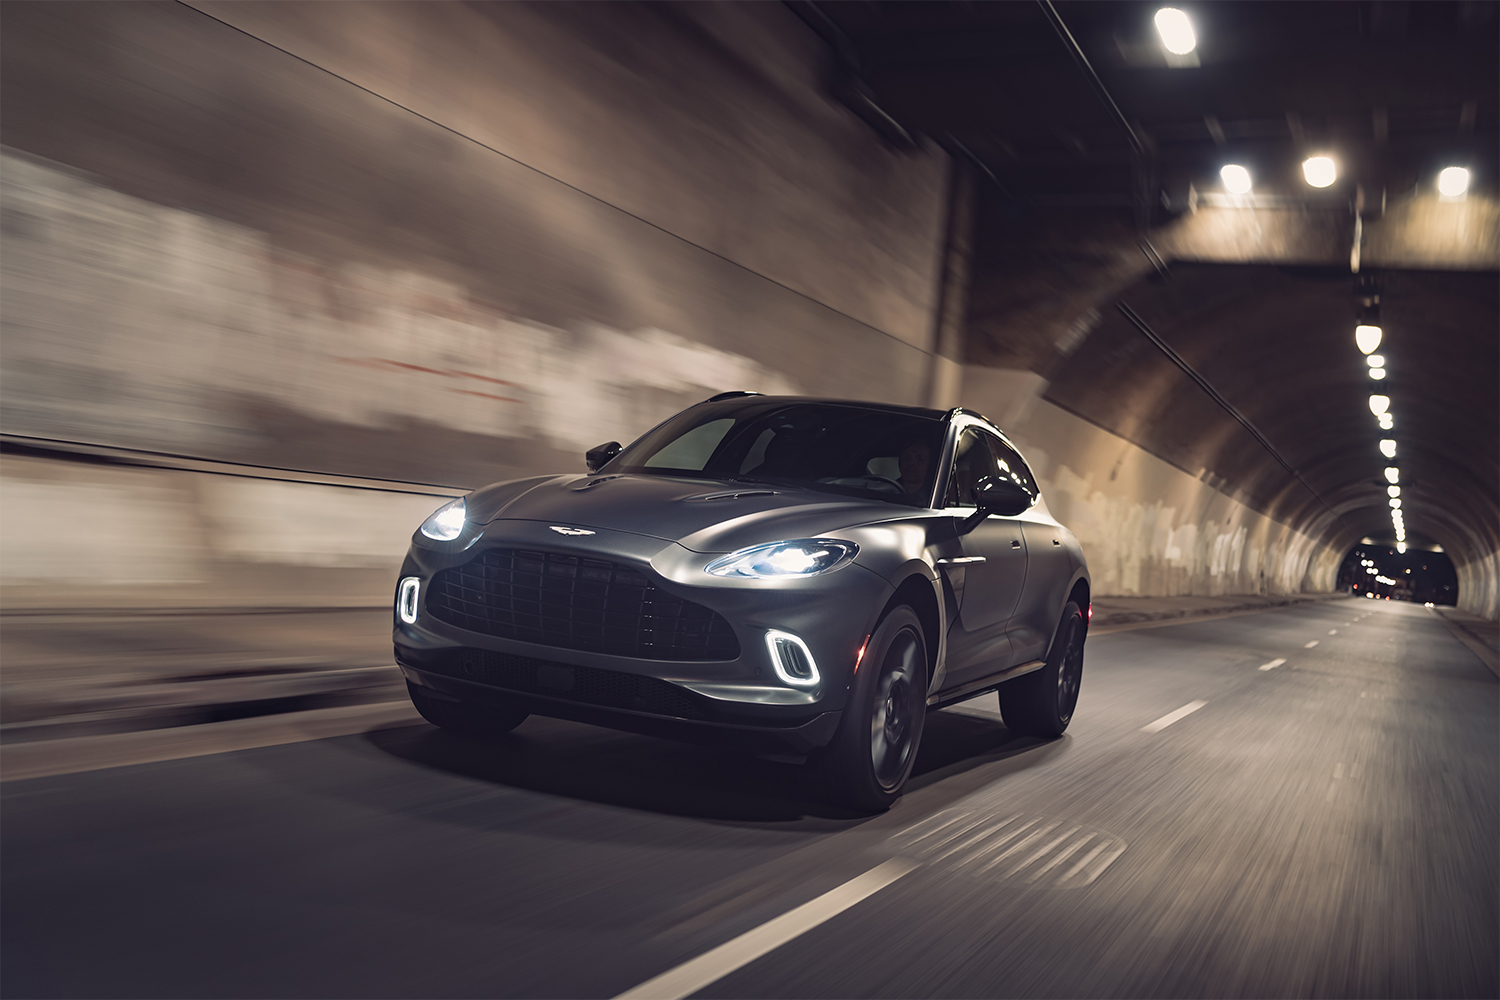 The Aston Martin DBX, one of our favorite vehicles of 2021